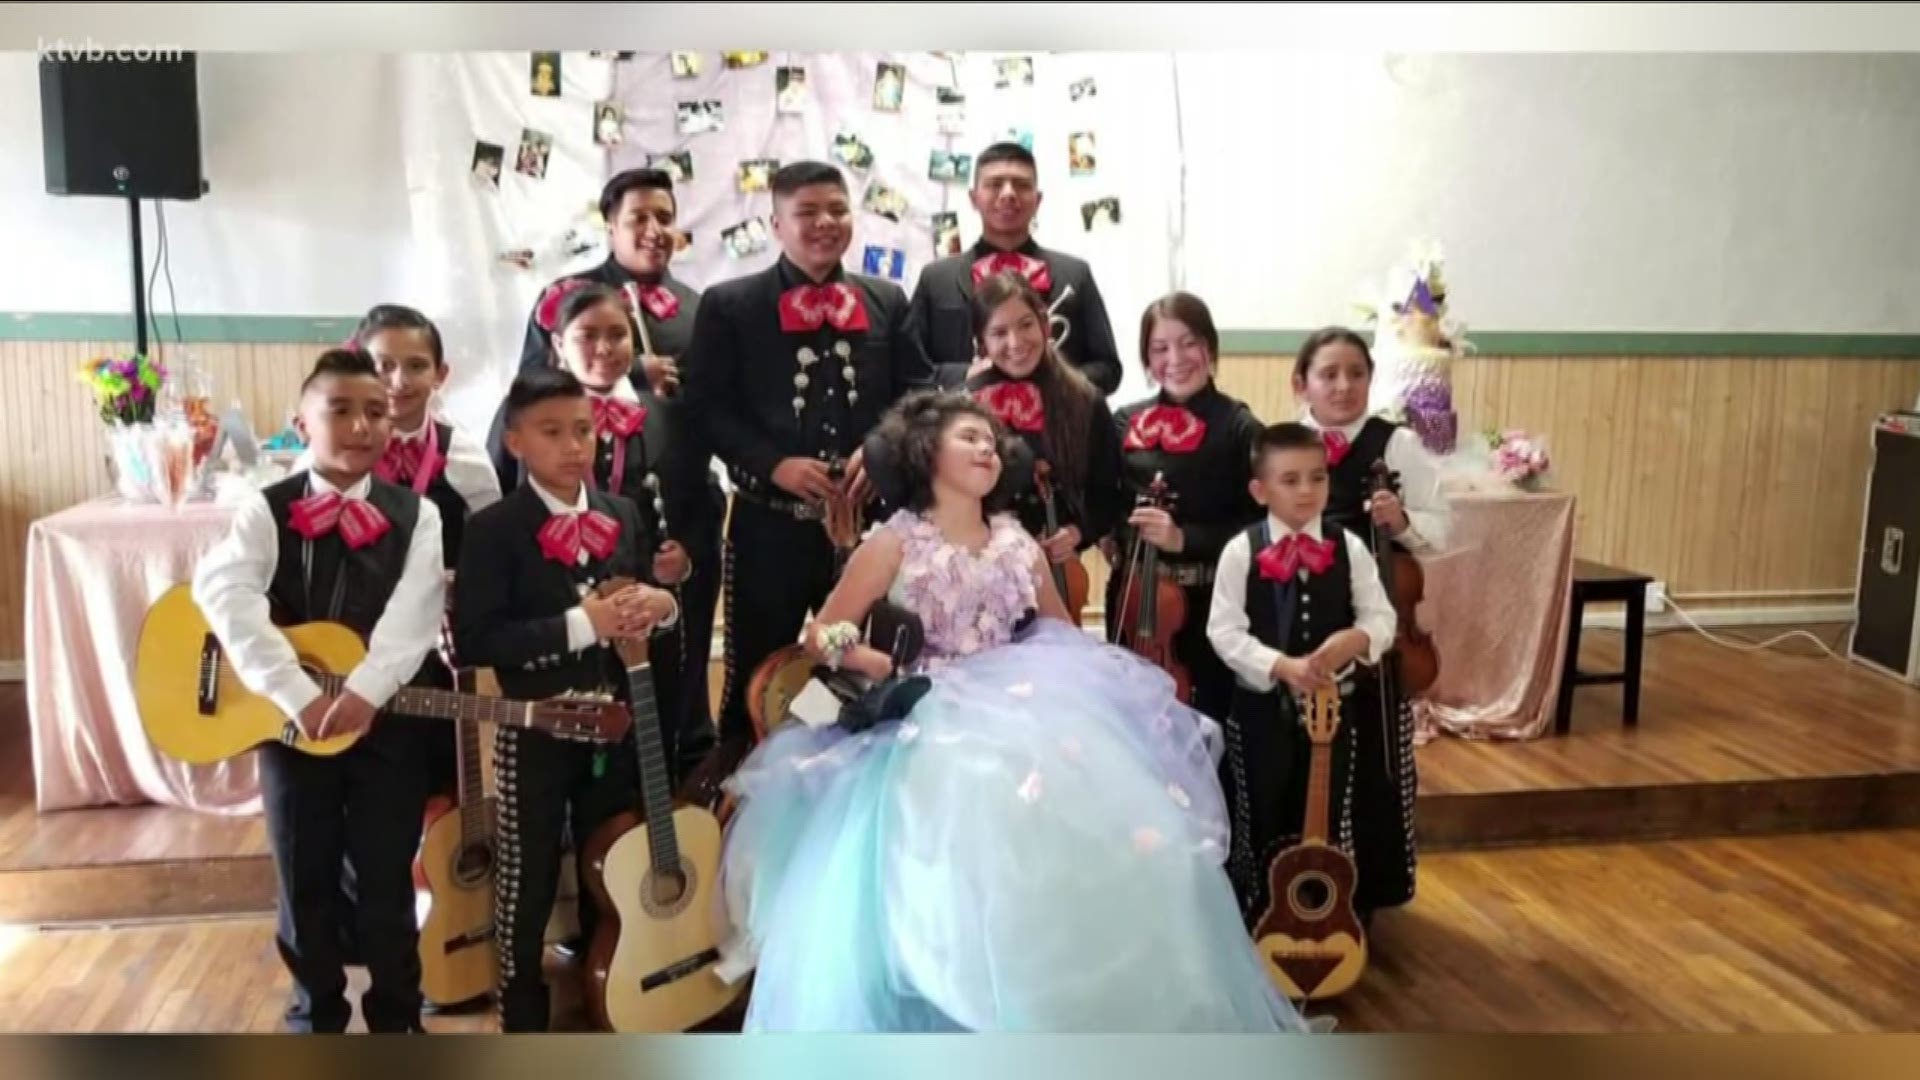 Aaliyah Gaines celebrated her 15th birthday in style with a traditional Quinceanera, thanks to family and friends who pitched in and made it all possible.